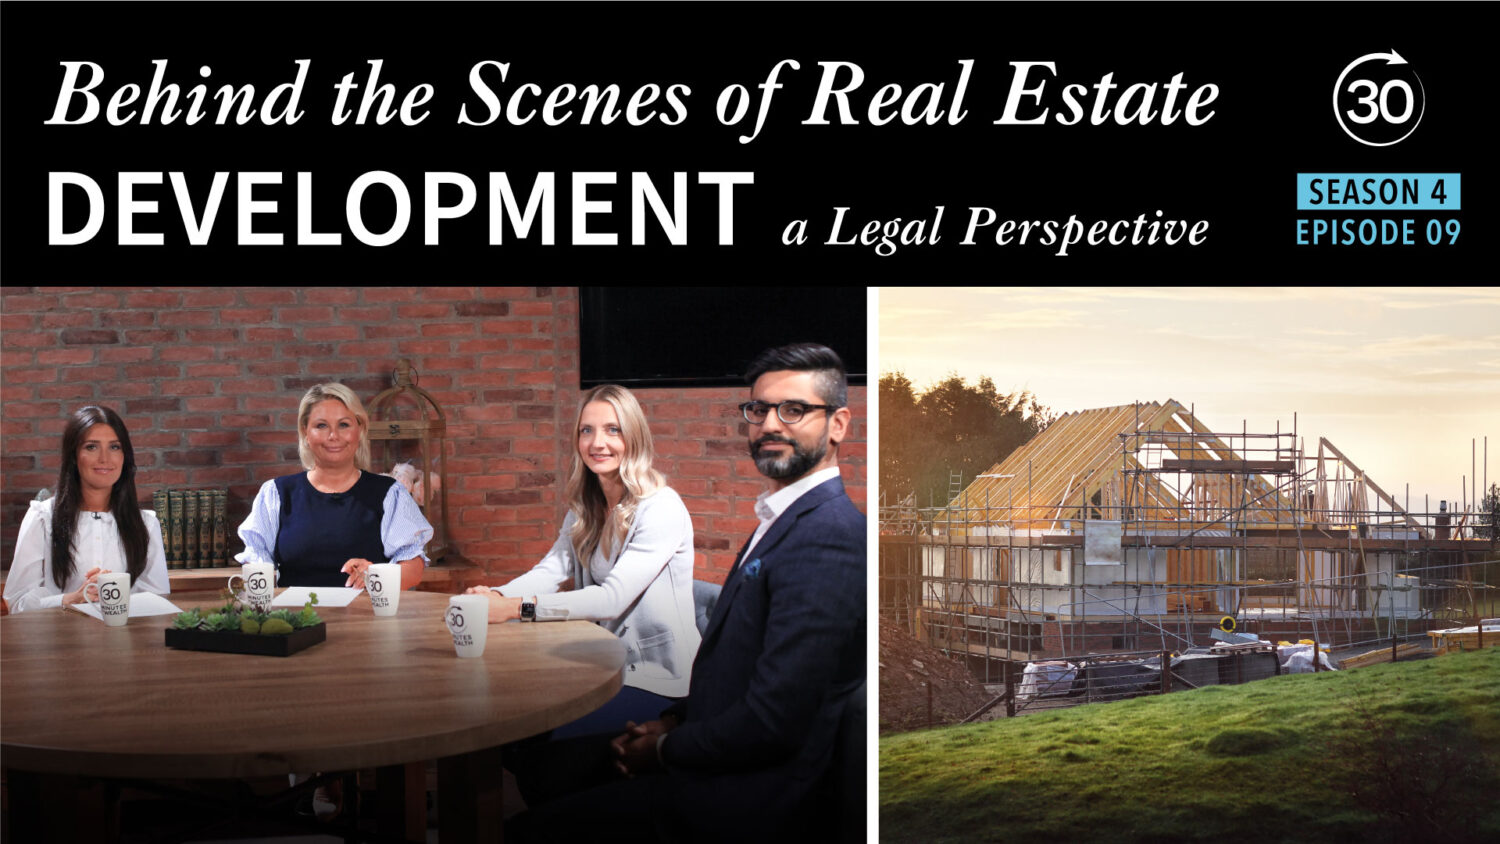 S4 E9 - Behind the Scenes of Real Estate Development: A Legal Perspective